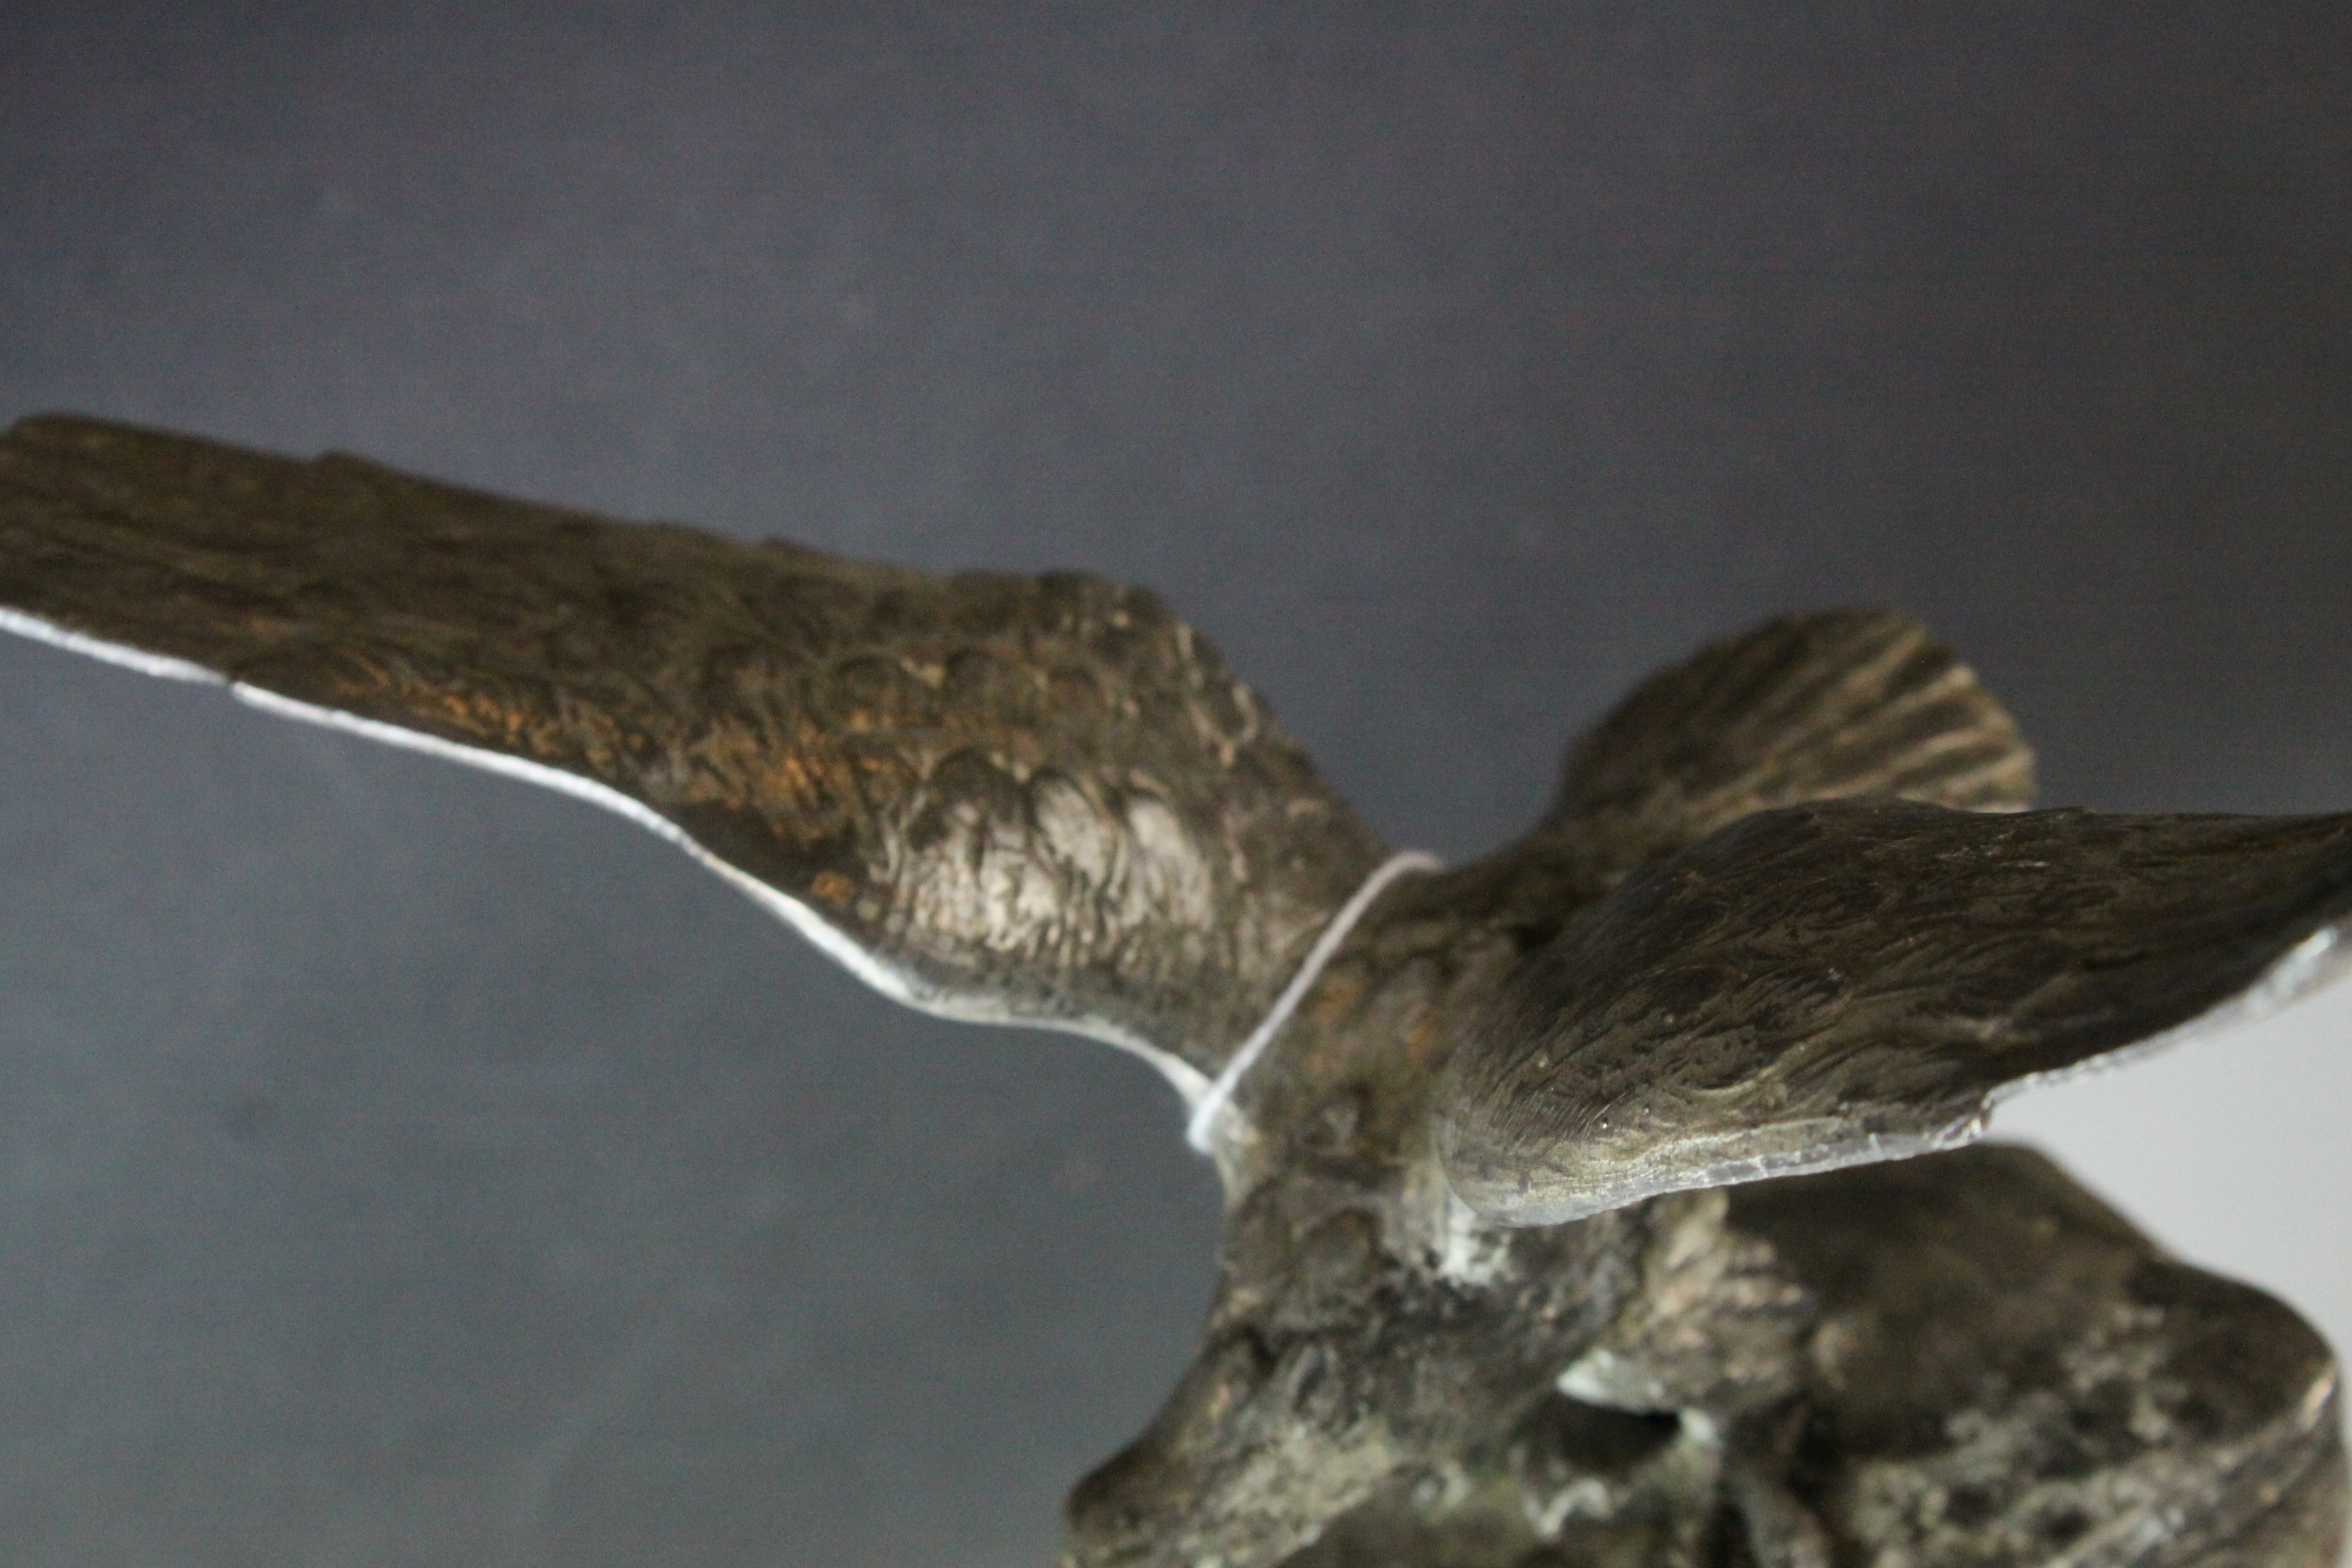 Sculpture of a Silver Plated Eagle on a Rock - Image 6 of 6